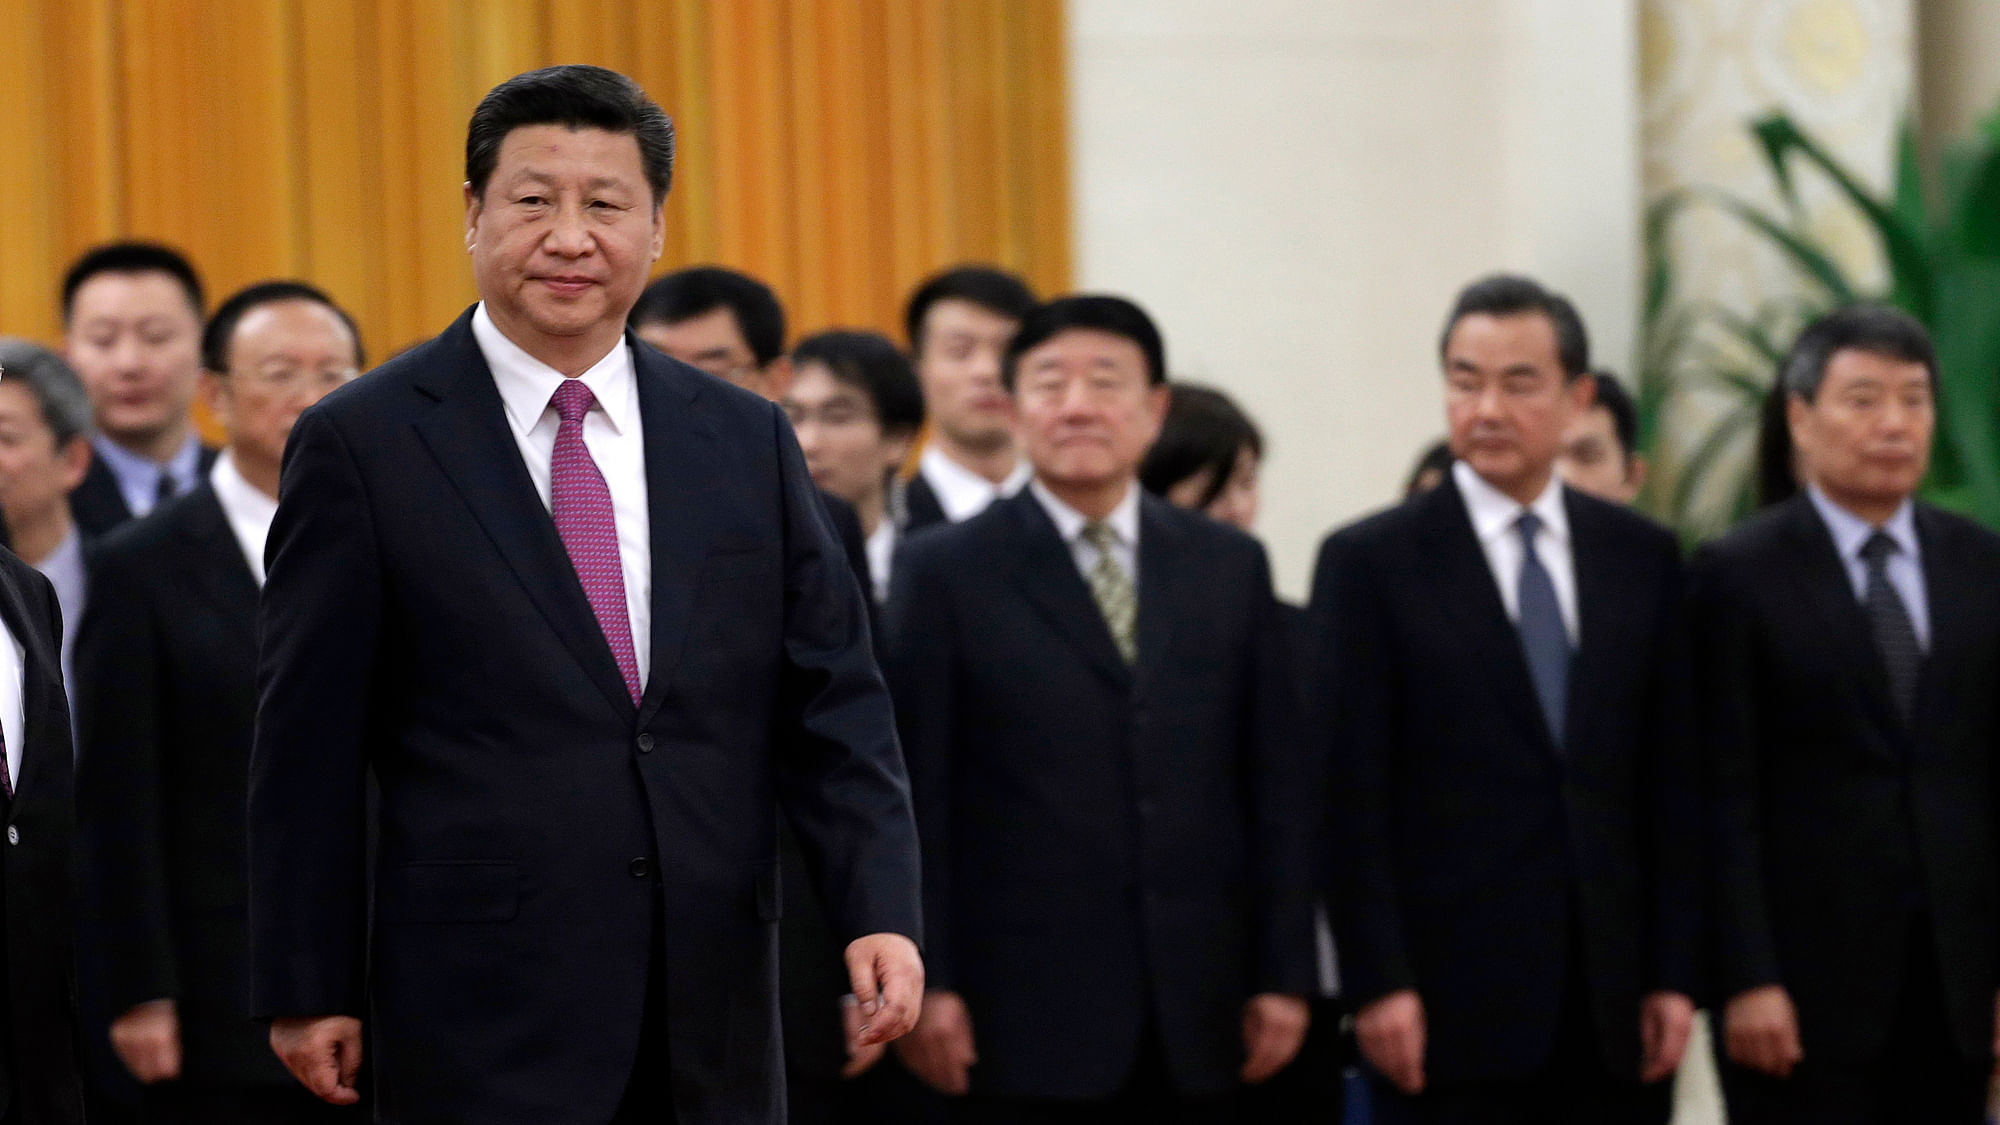 China’s President Xi Jinping walks in front of Chinese senior officials during a welcoming ceremony (Photo: Reuters)